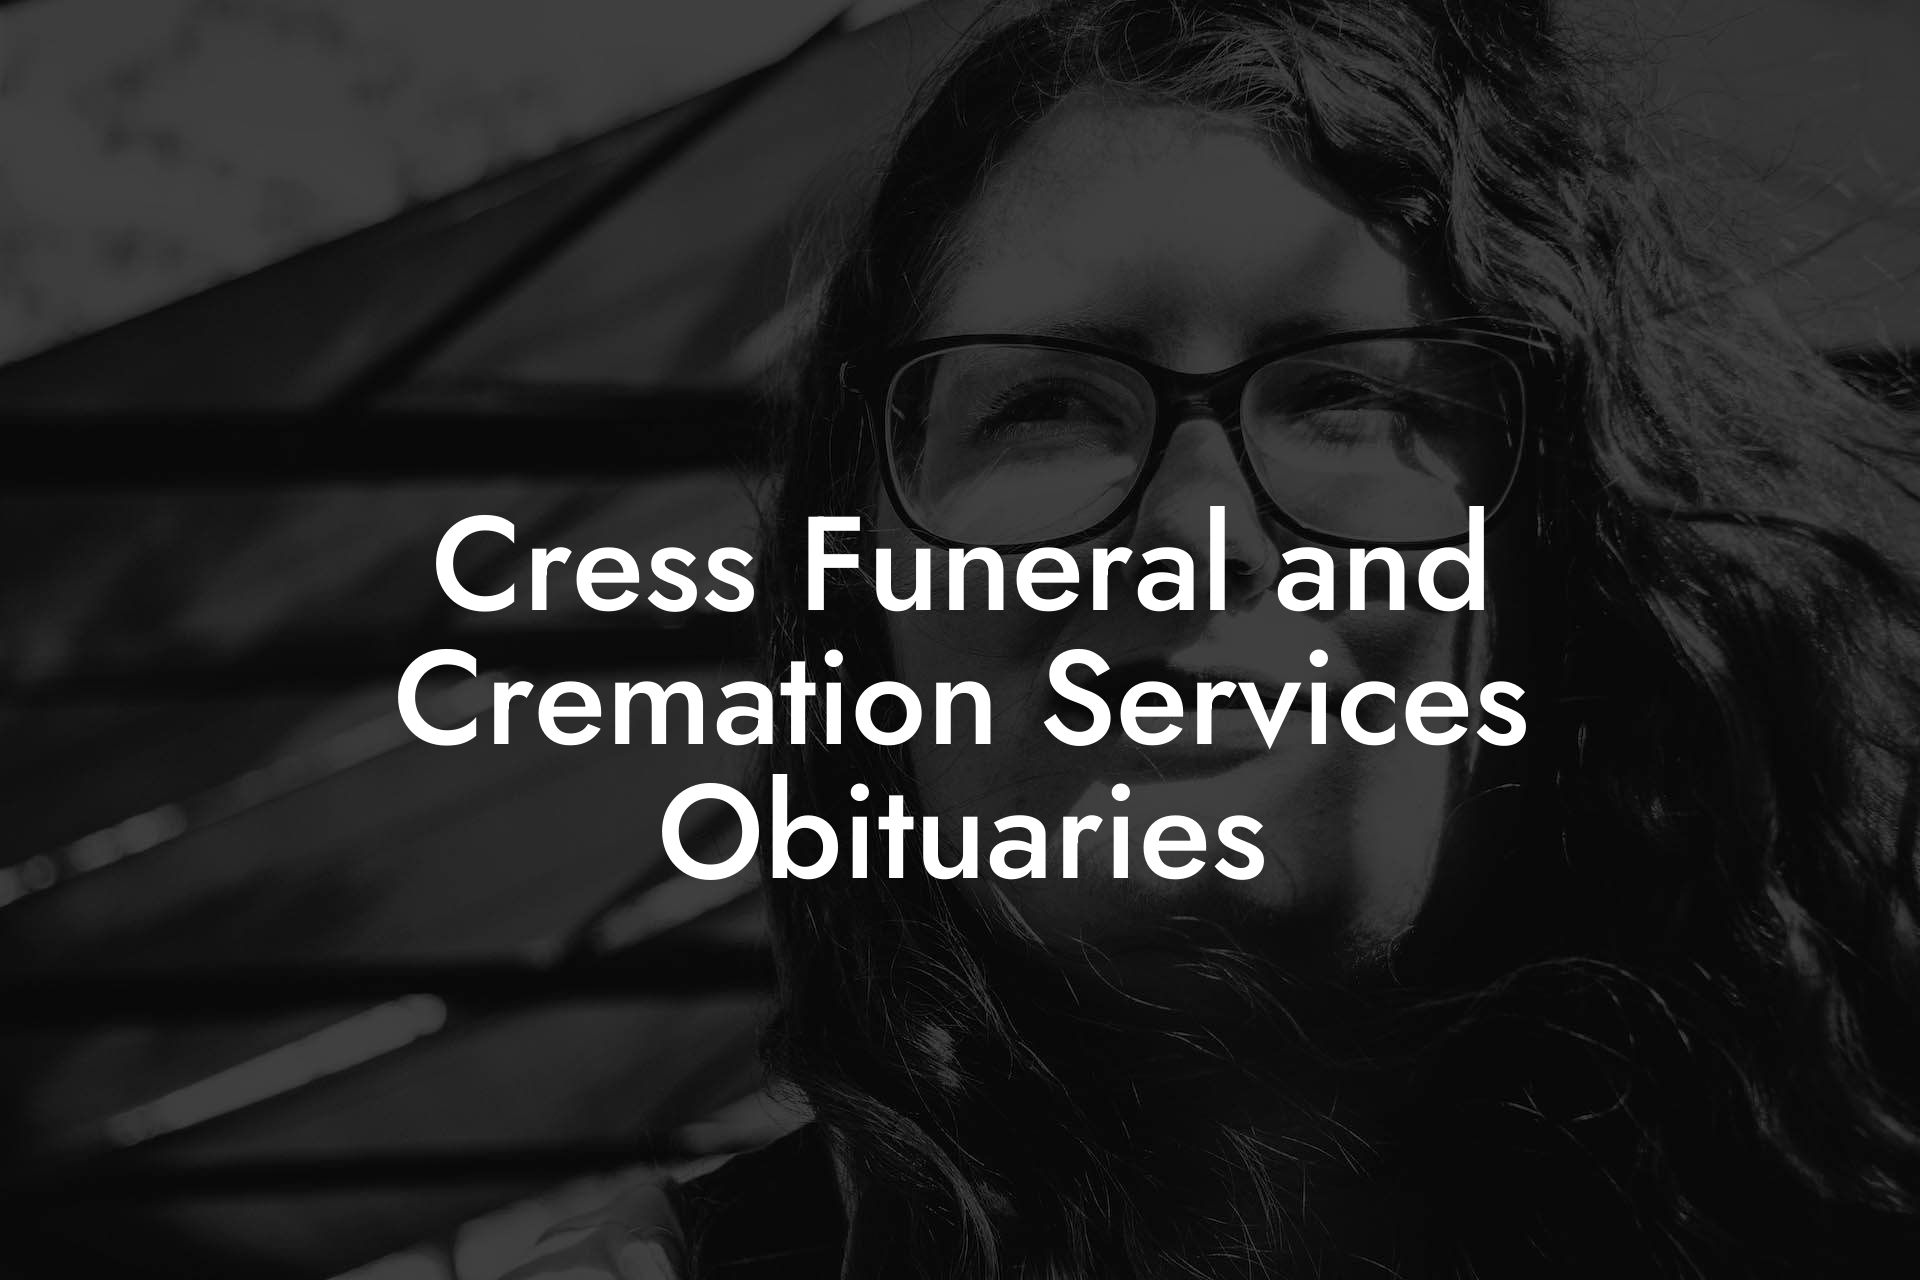 Cress Funeral and Cremation Services Obituaries